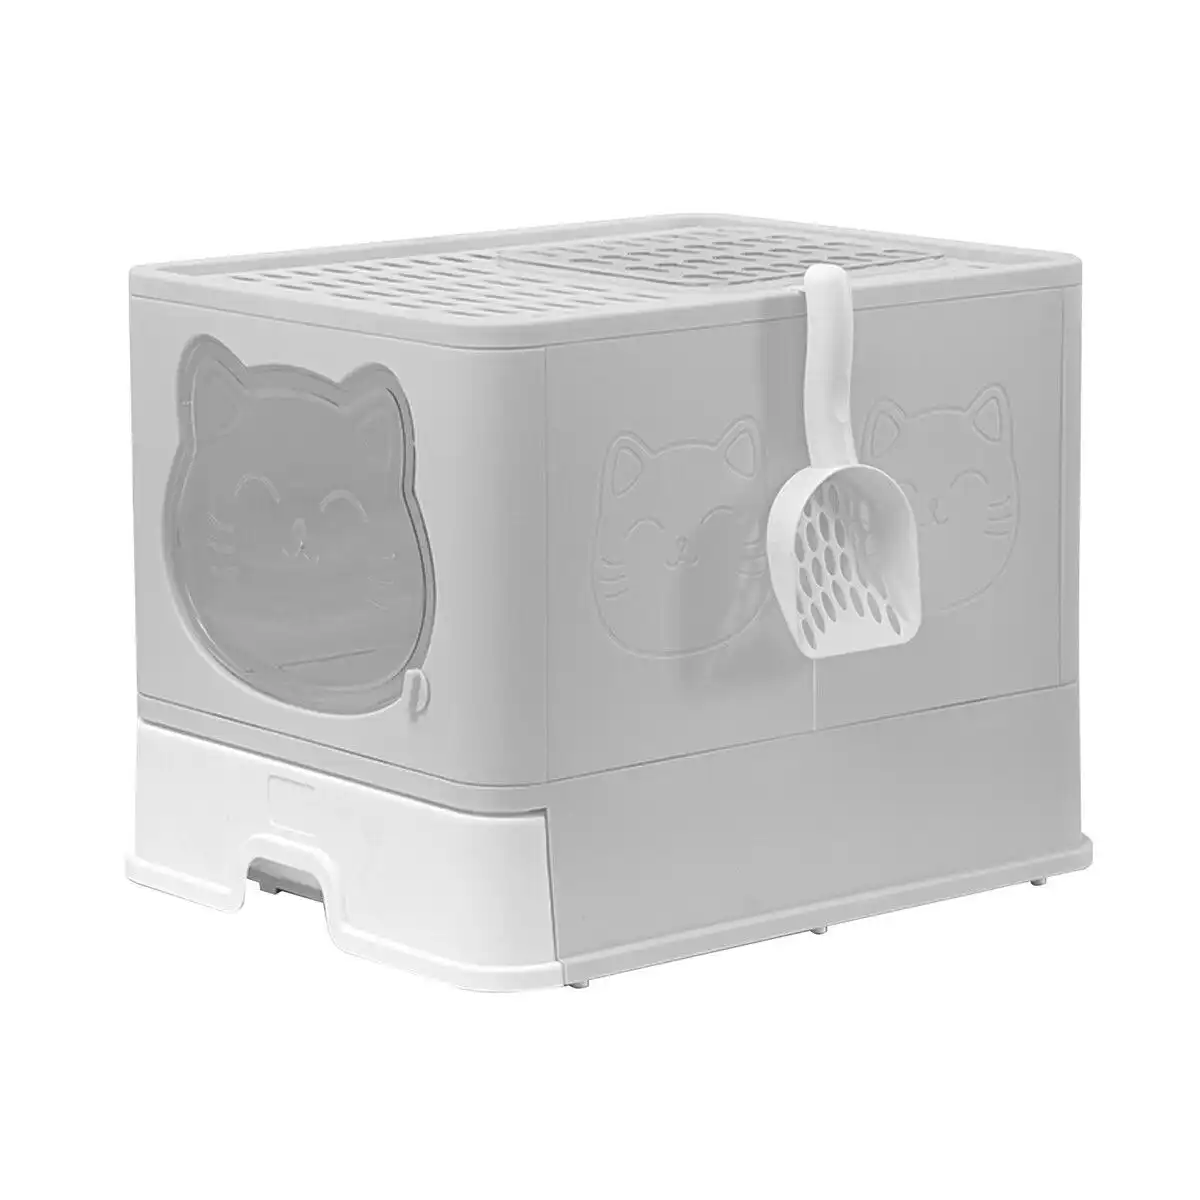 Pet Scene Cat Litter Box Tray Enclosed Kitty Toilet Training Front Top Entry Lid Large Covered Hooded Kitten Potty Pan Furniture Scoop Foldable